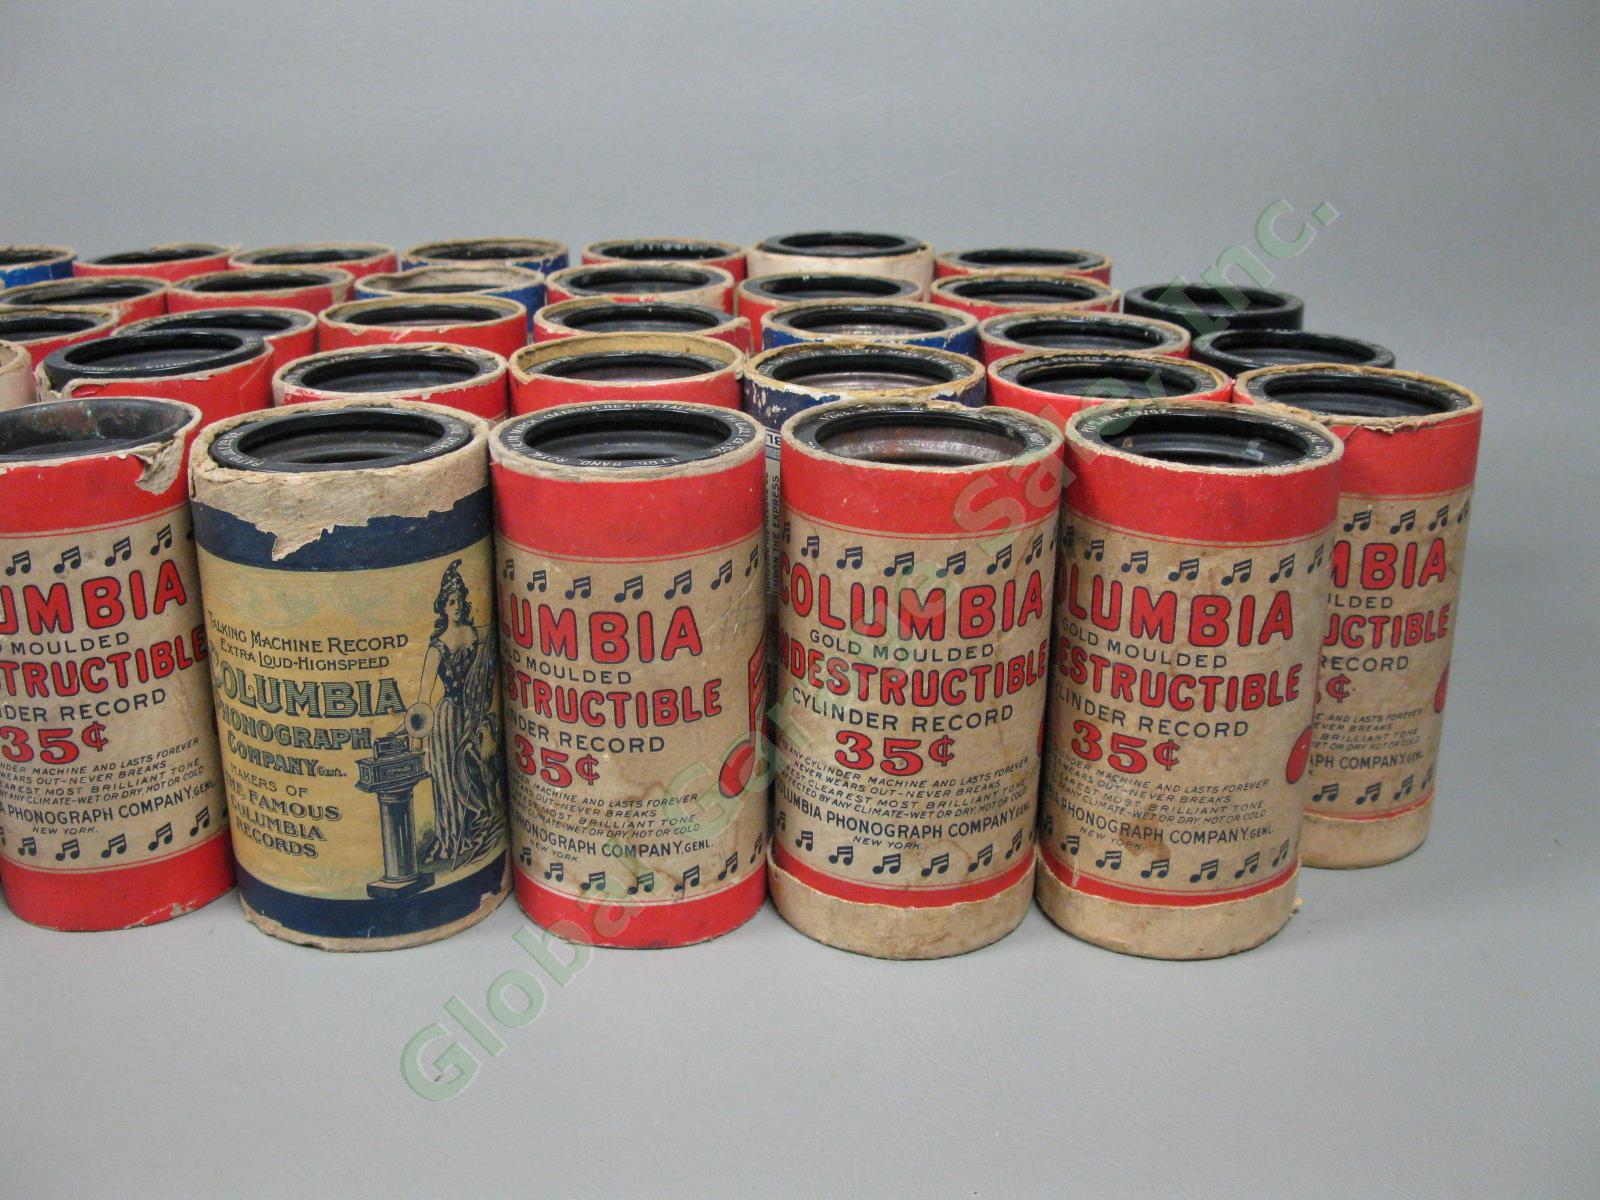 43 RARE Antique Indestructible Columbia Song Cylinder Record Collection Lot Set 2